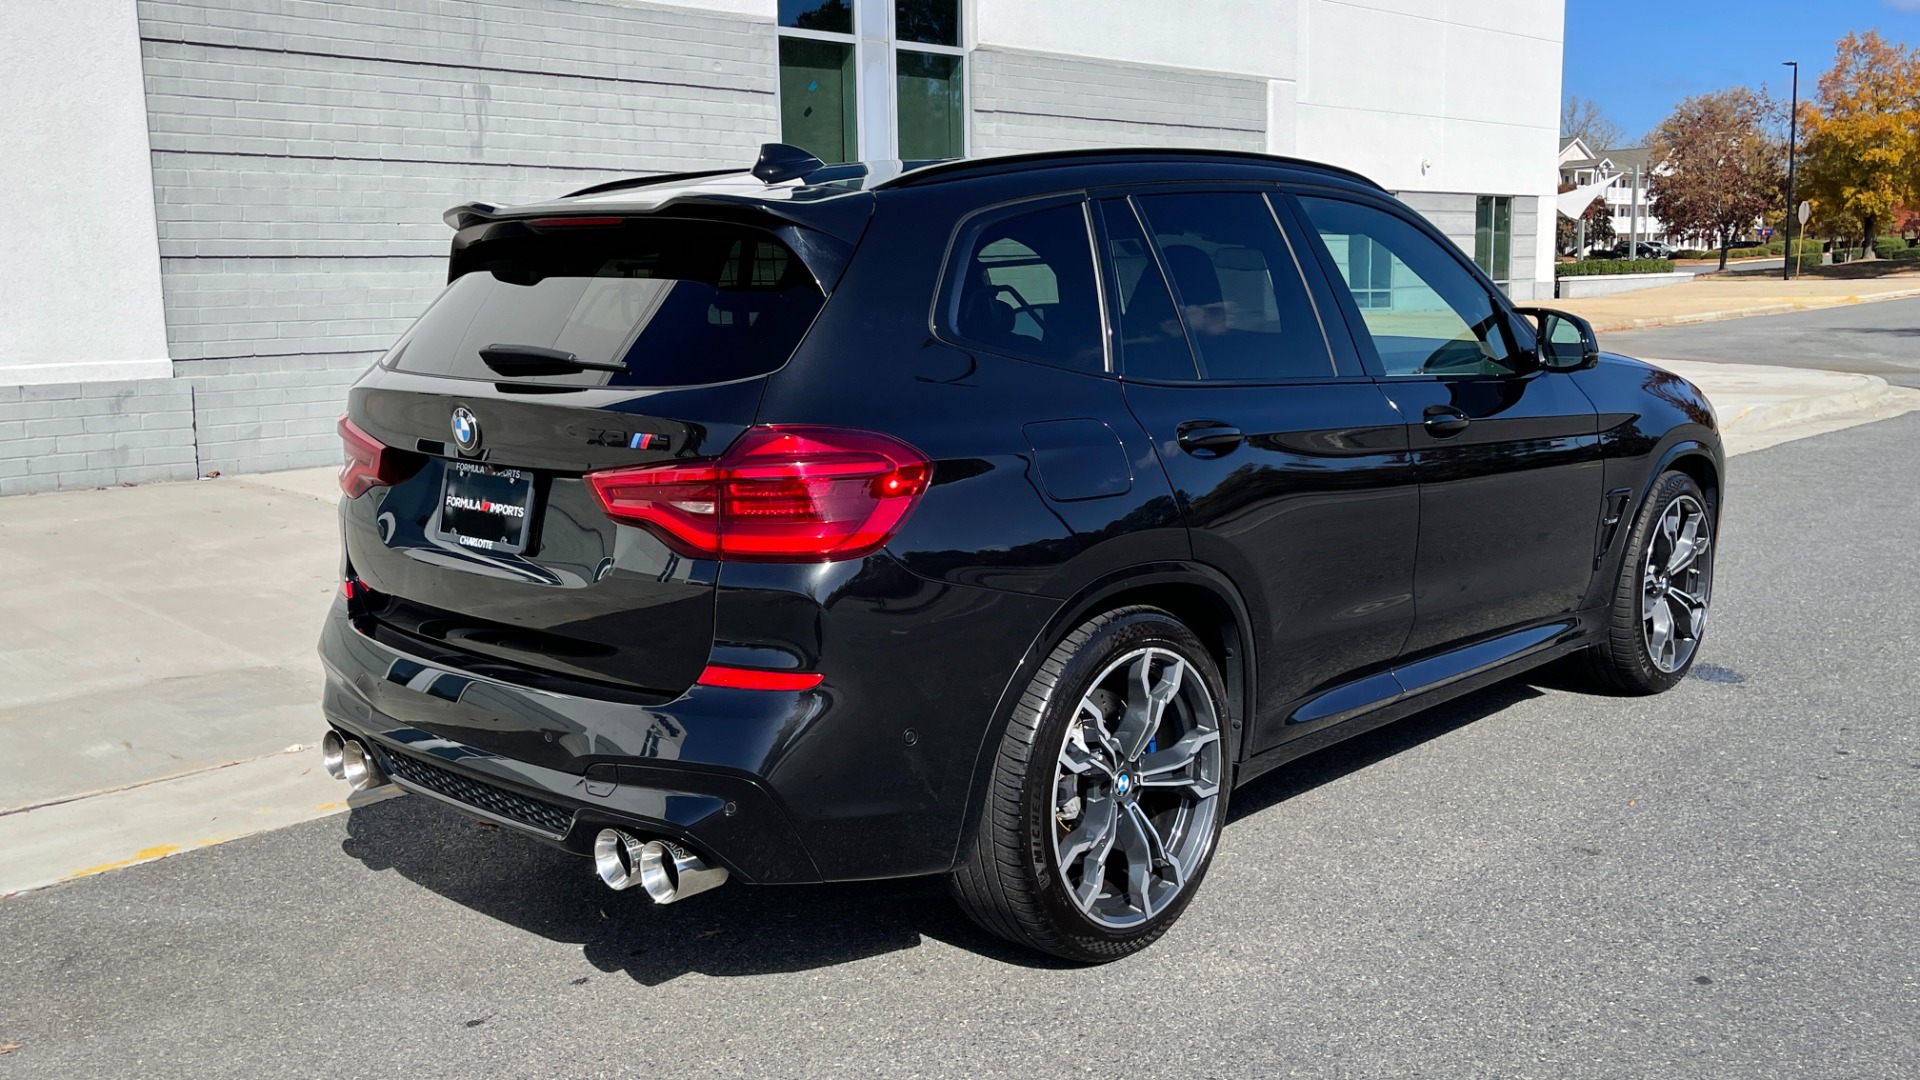 Used 2020 BMW X3 M MERINO LEATHER / EXECUTIVE PACKAGE / DINAN EXHAUST for sale $58,999 at Formula Imports in Charlotte NC 28227 7